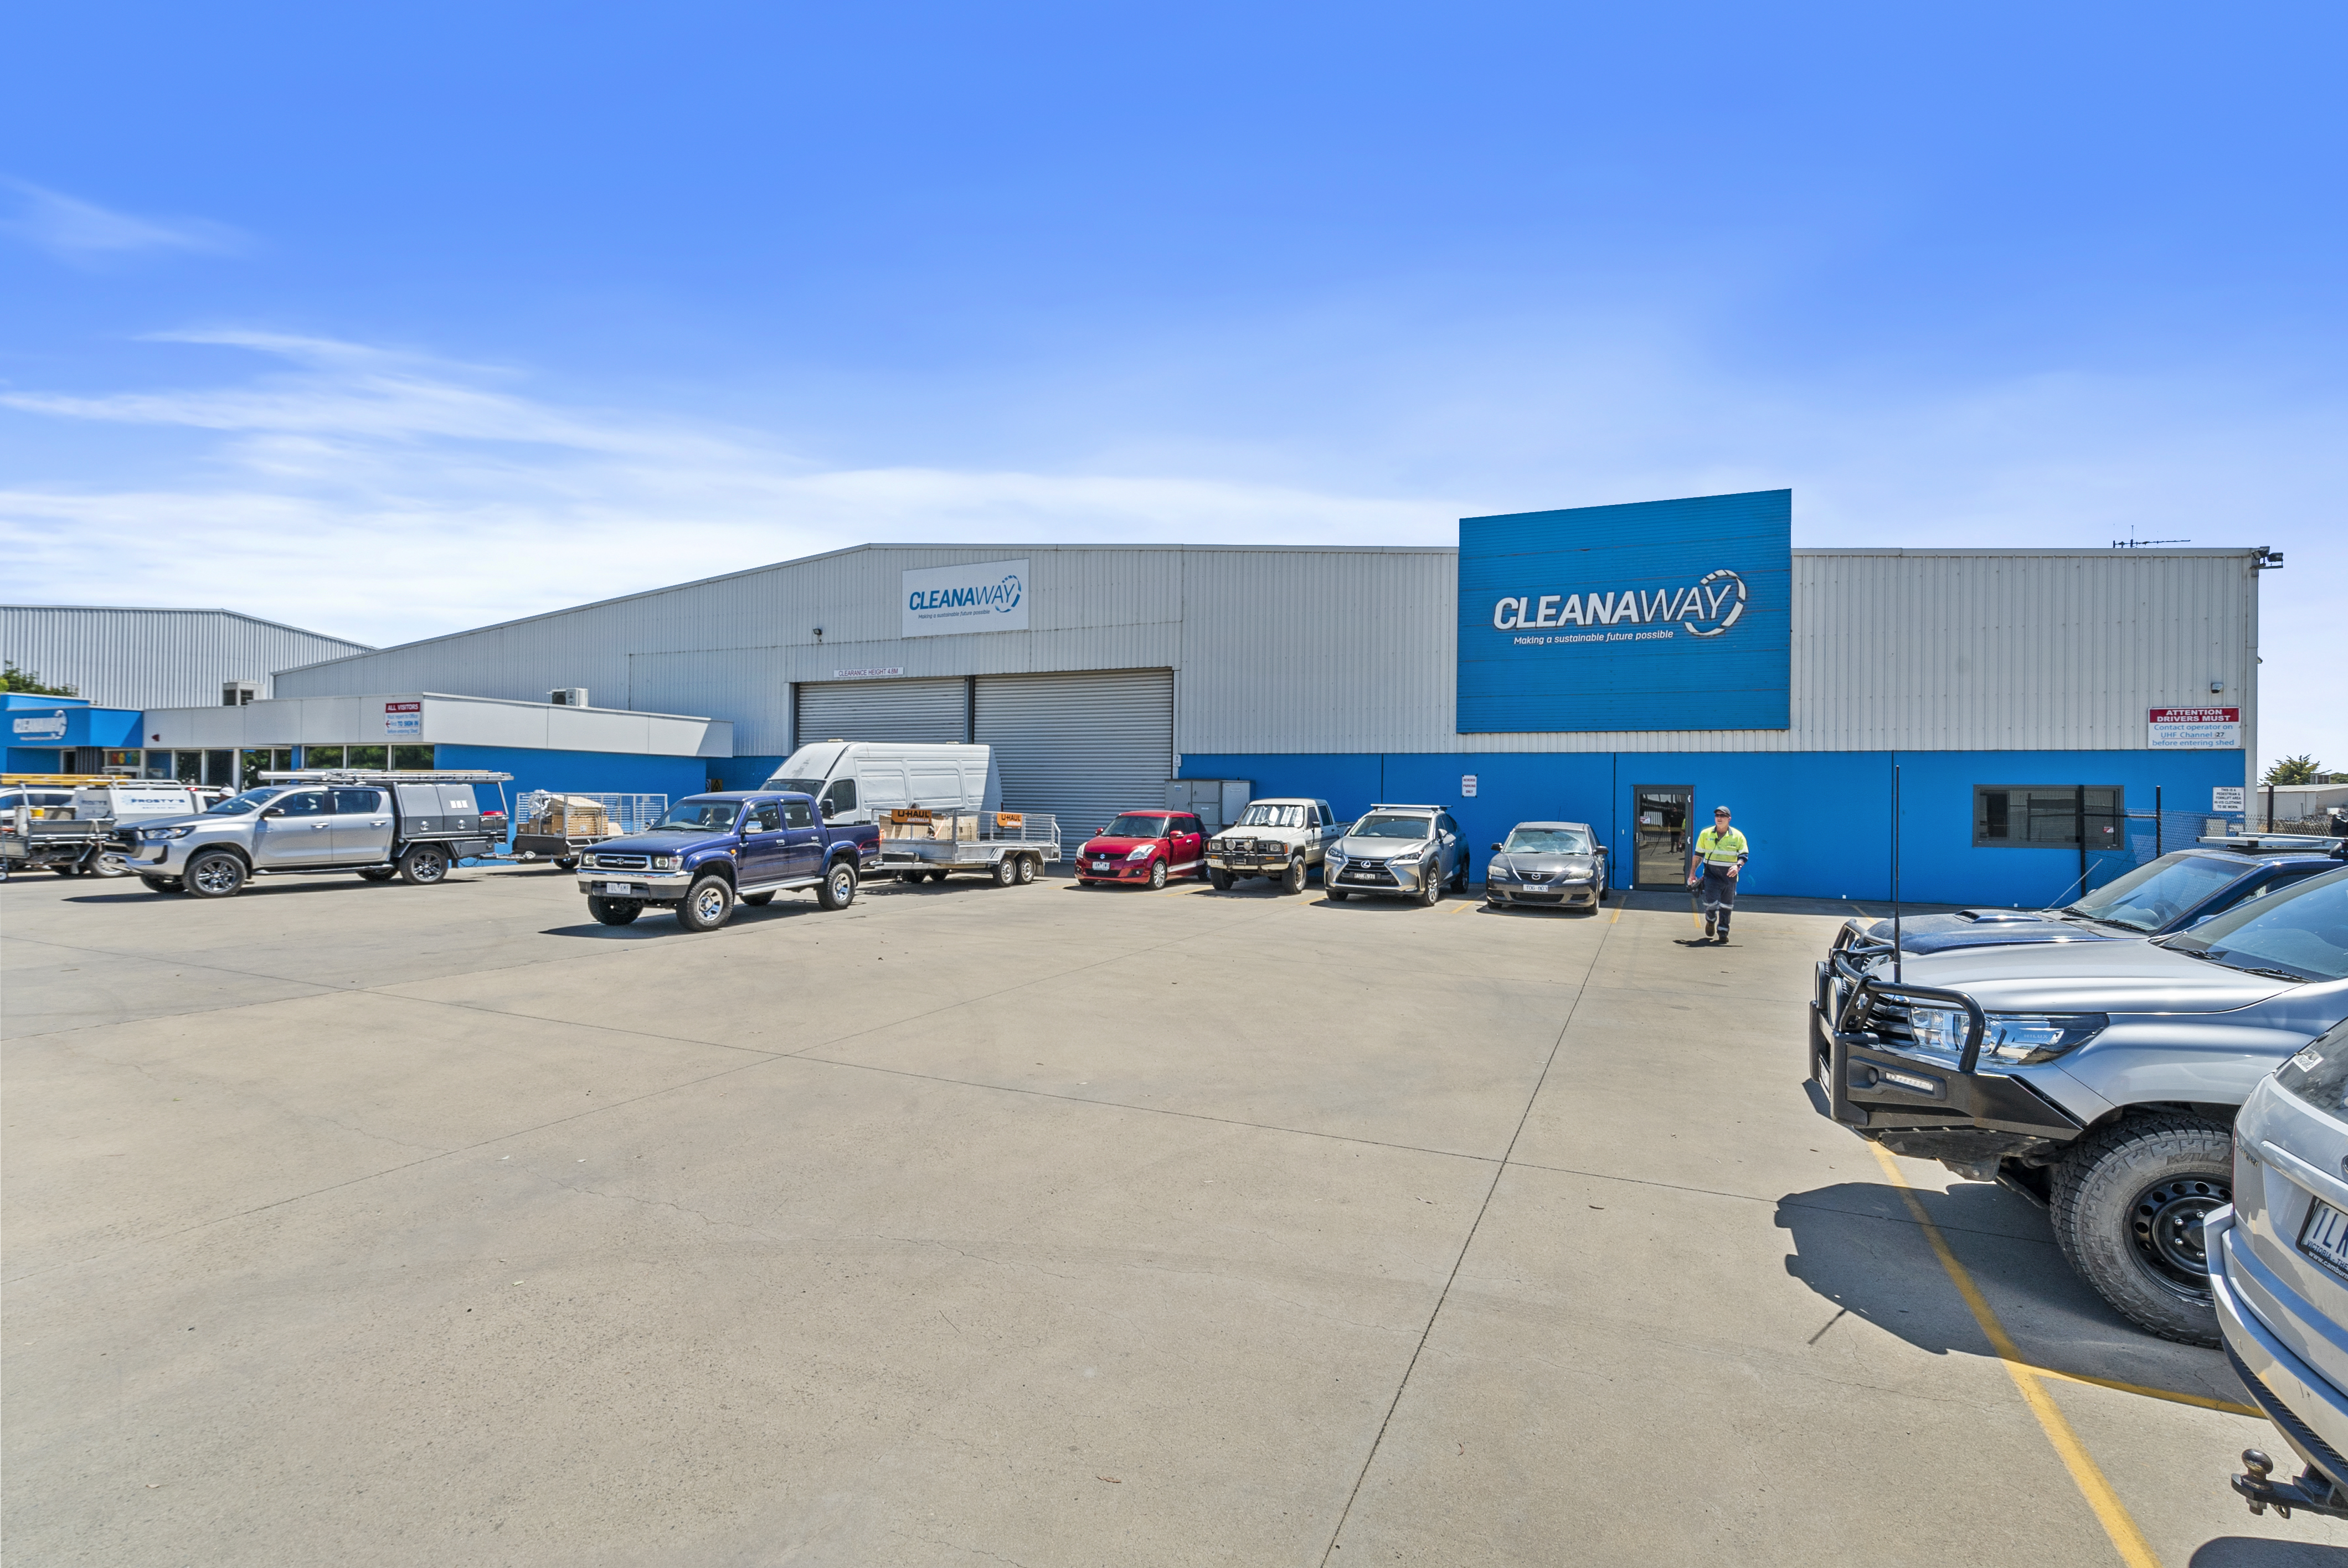 Shepparton Industrial Site Sold for $7 Million Amid High Investor Demand